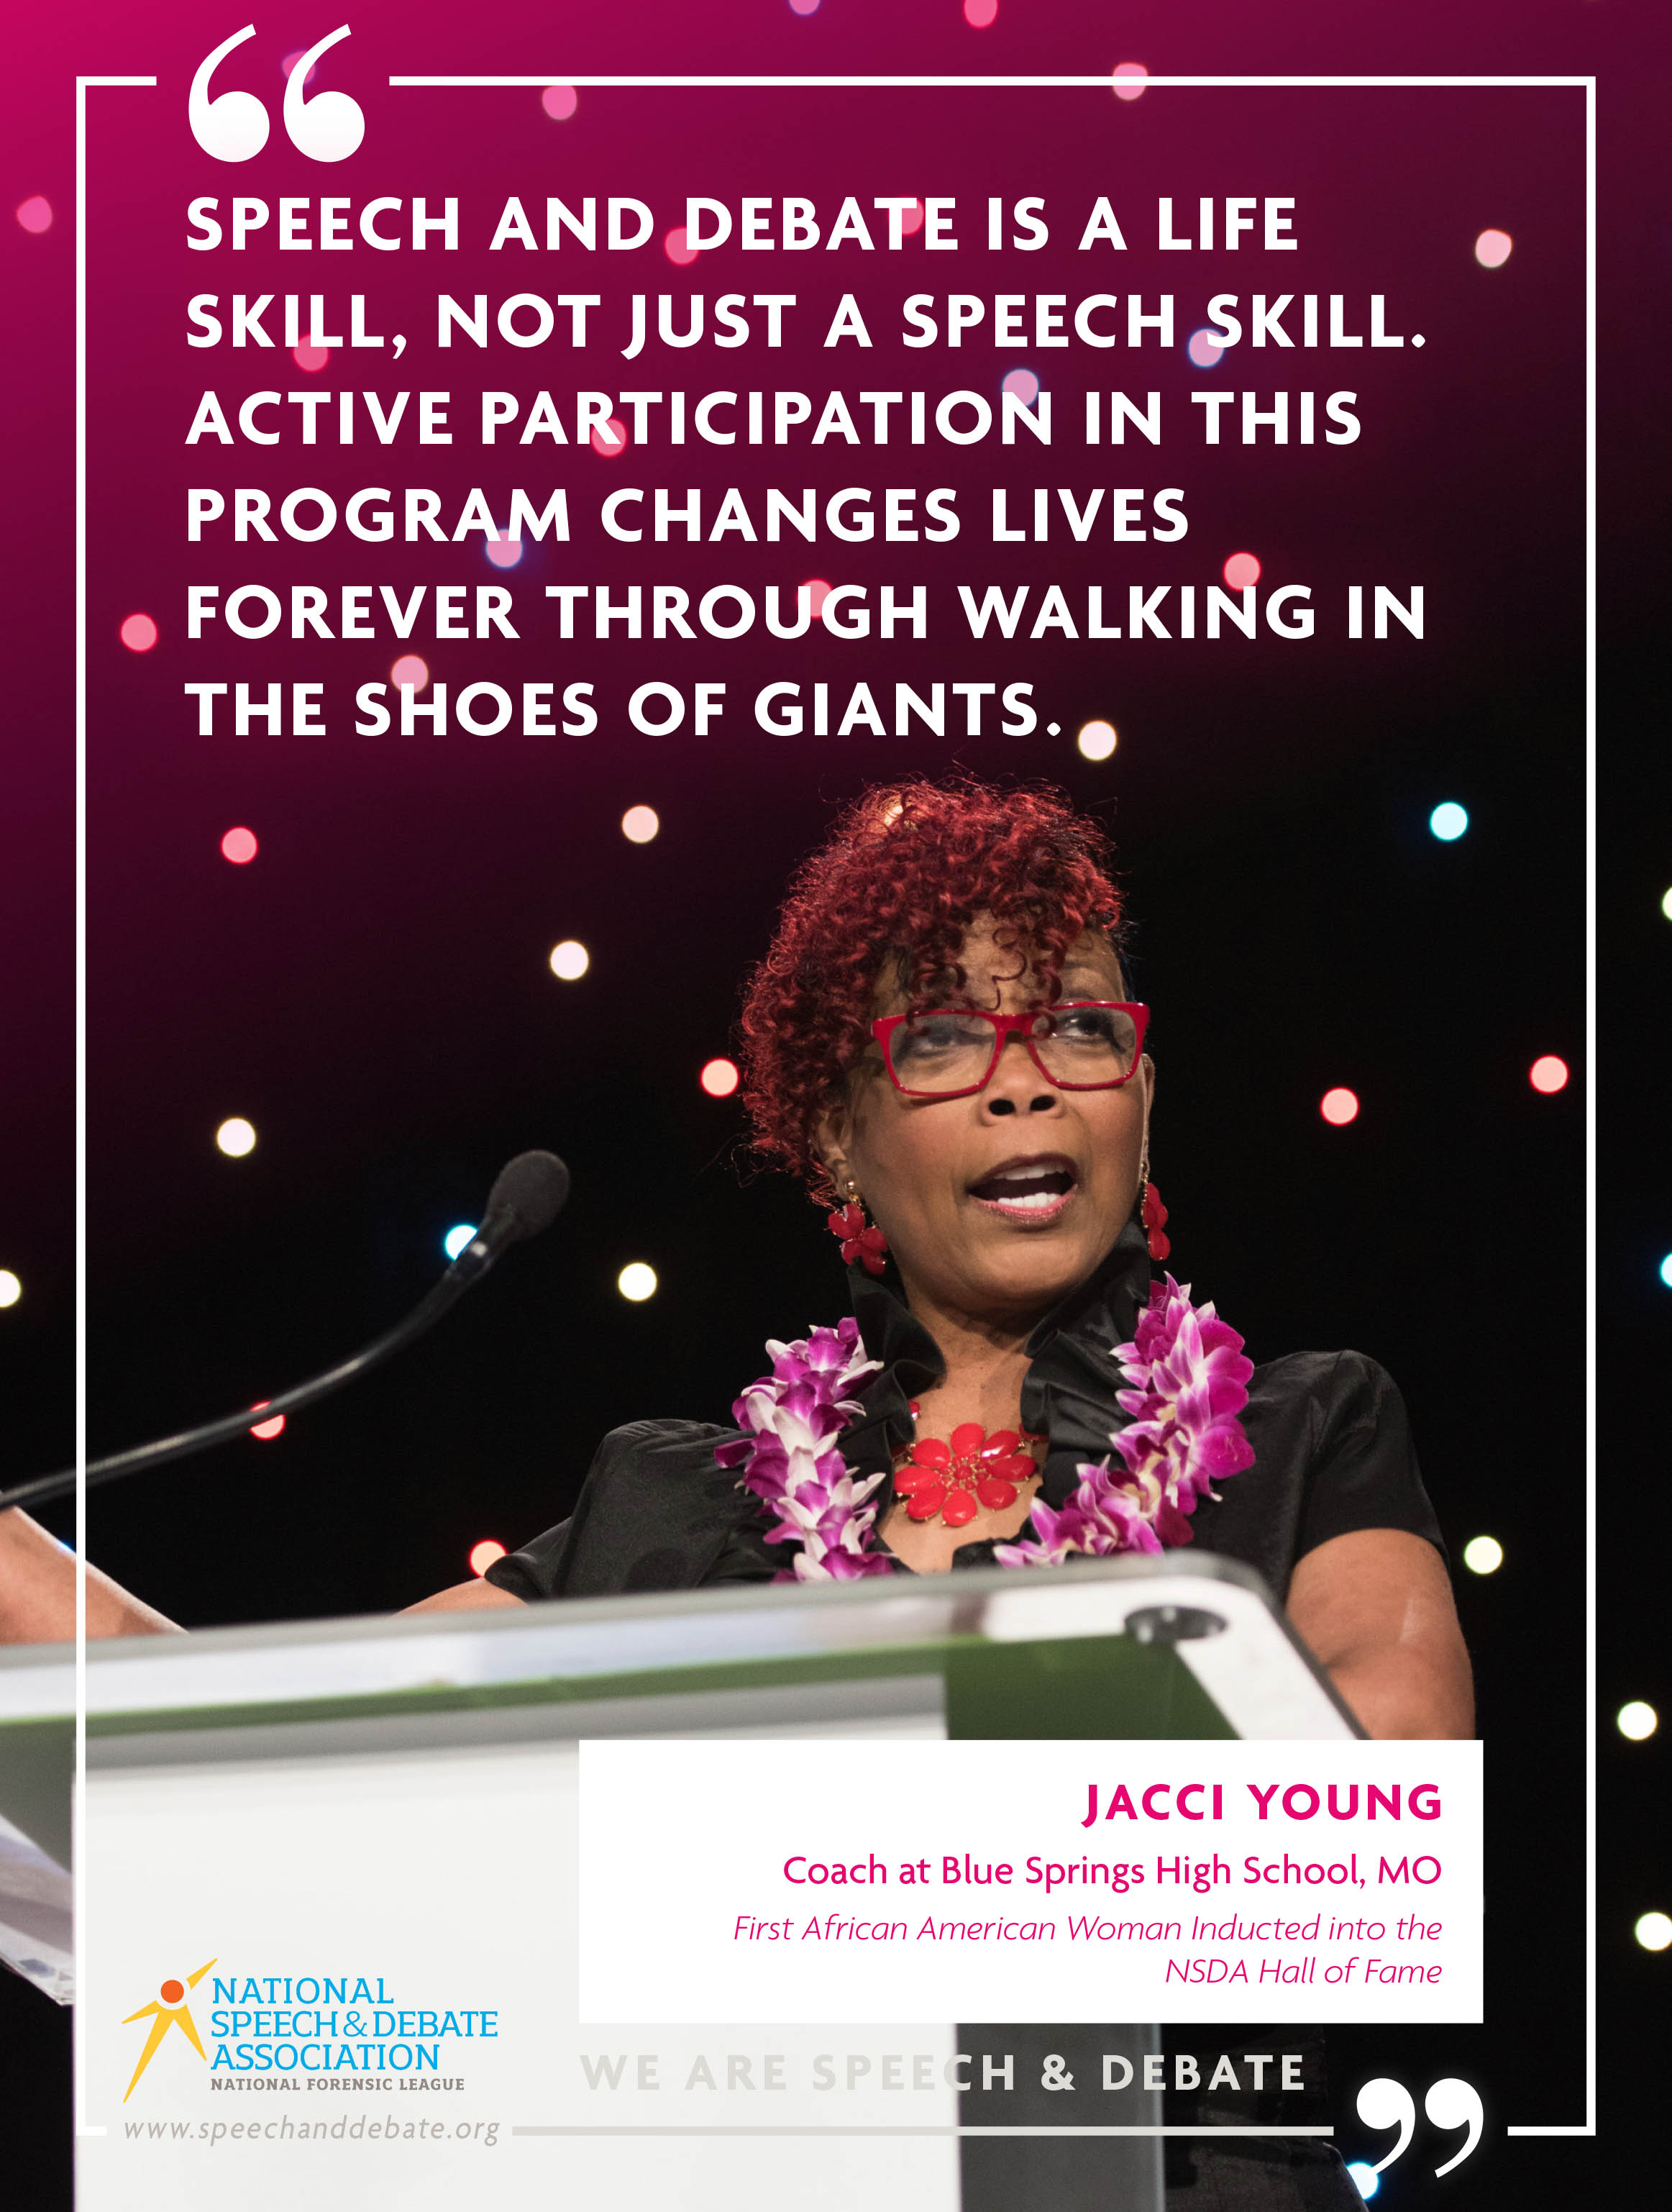 "SPEECH AND DEBATE IS A LIFE SKILL, NOT JUST A SPEECH SKILL. ACTIVE PARTICIPATION IN THIS PROGRAM CHANGES LIVES FOREVER THROUGH WALKING IN THE SHOES OF GIANTS." - Jacci Young